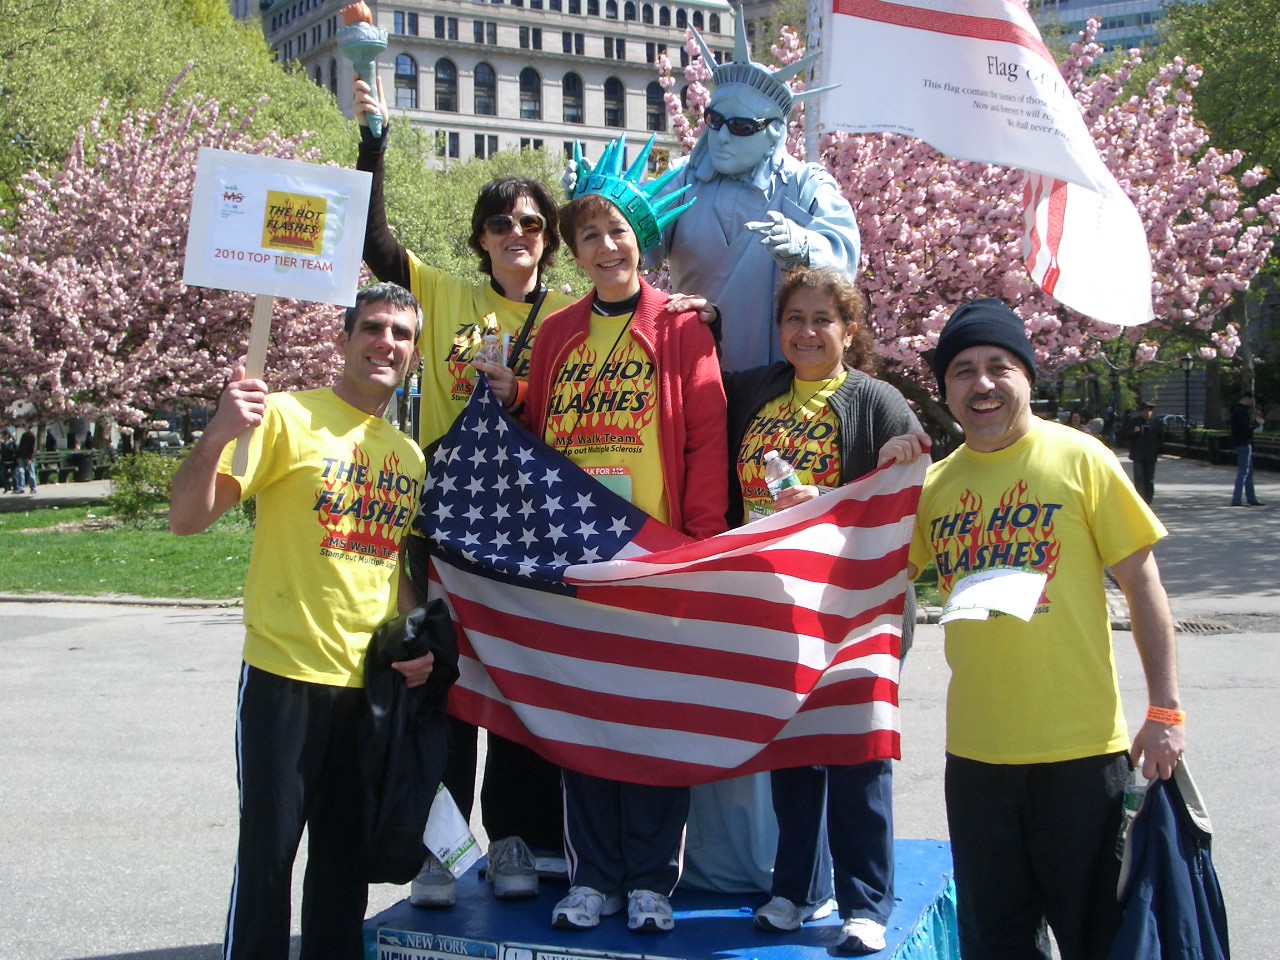 Picture of the Hot Flashes team at South Street Seaport in 2010, with Lady Liberty